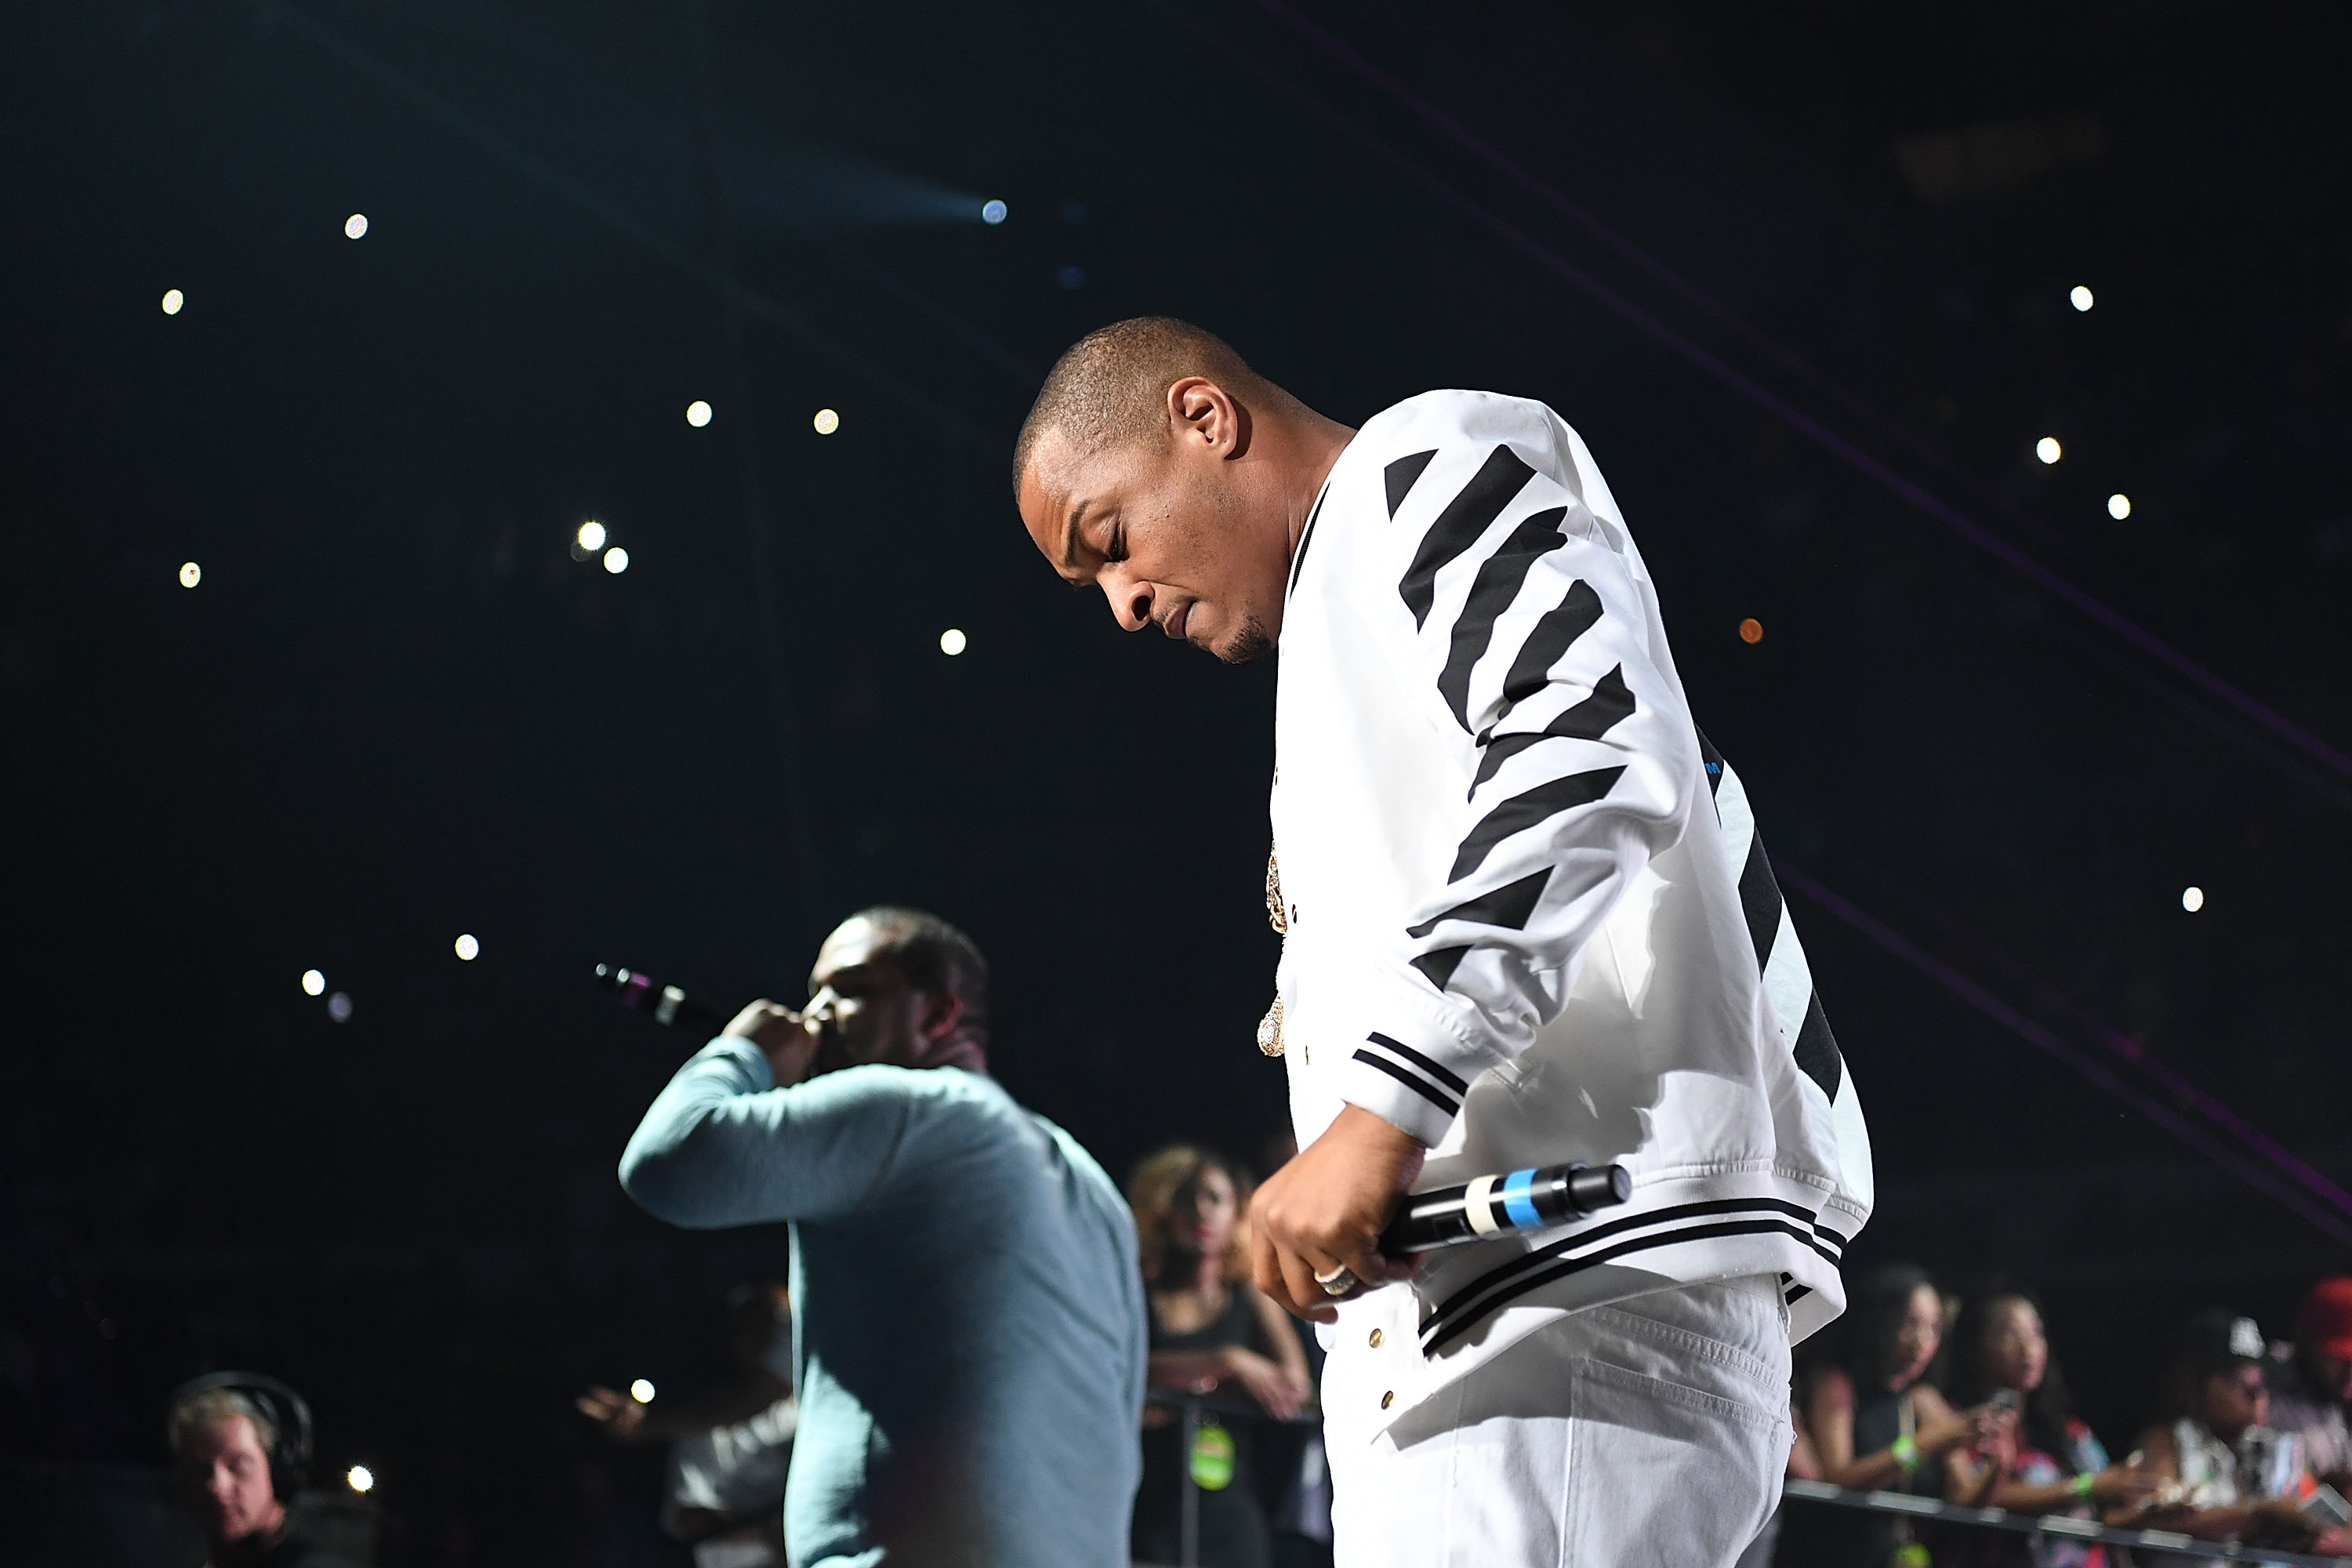 Rapper T.I. performs onstage at Hot 107.9 Birthday Bash at Philips Arena on June 18, 2016 in Atlanta, Georgia. (Paras Griffin&mdash;Getty Images)